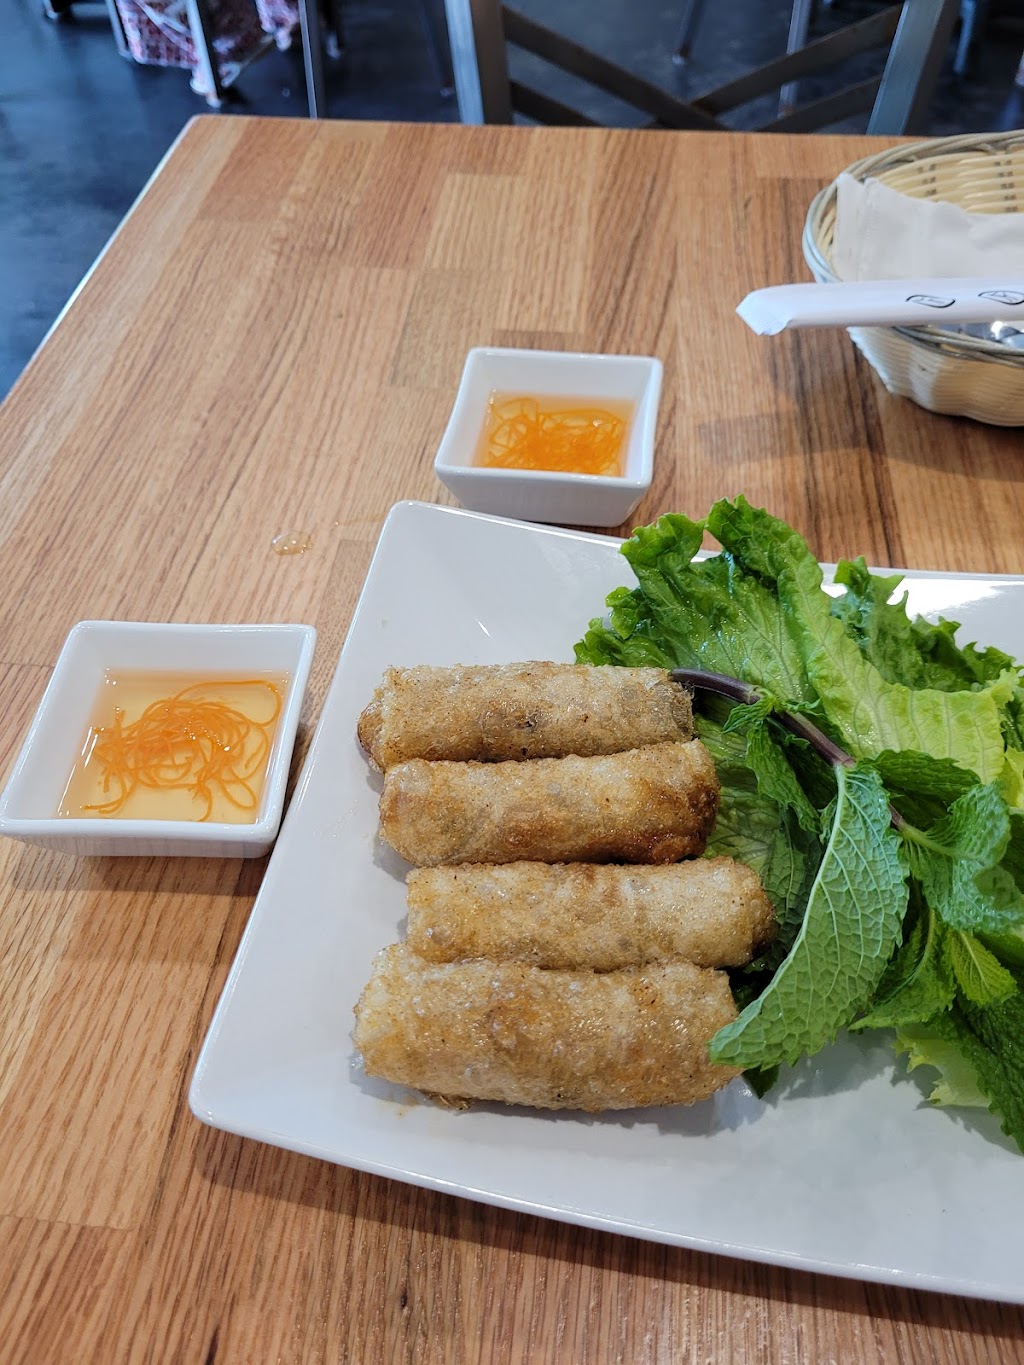 No.1 Pho Authentic Vietnamese Cuisine | 5025 Arco St, Cary, NC 27519 | Phone: (919) 297-2975